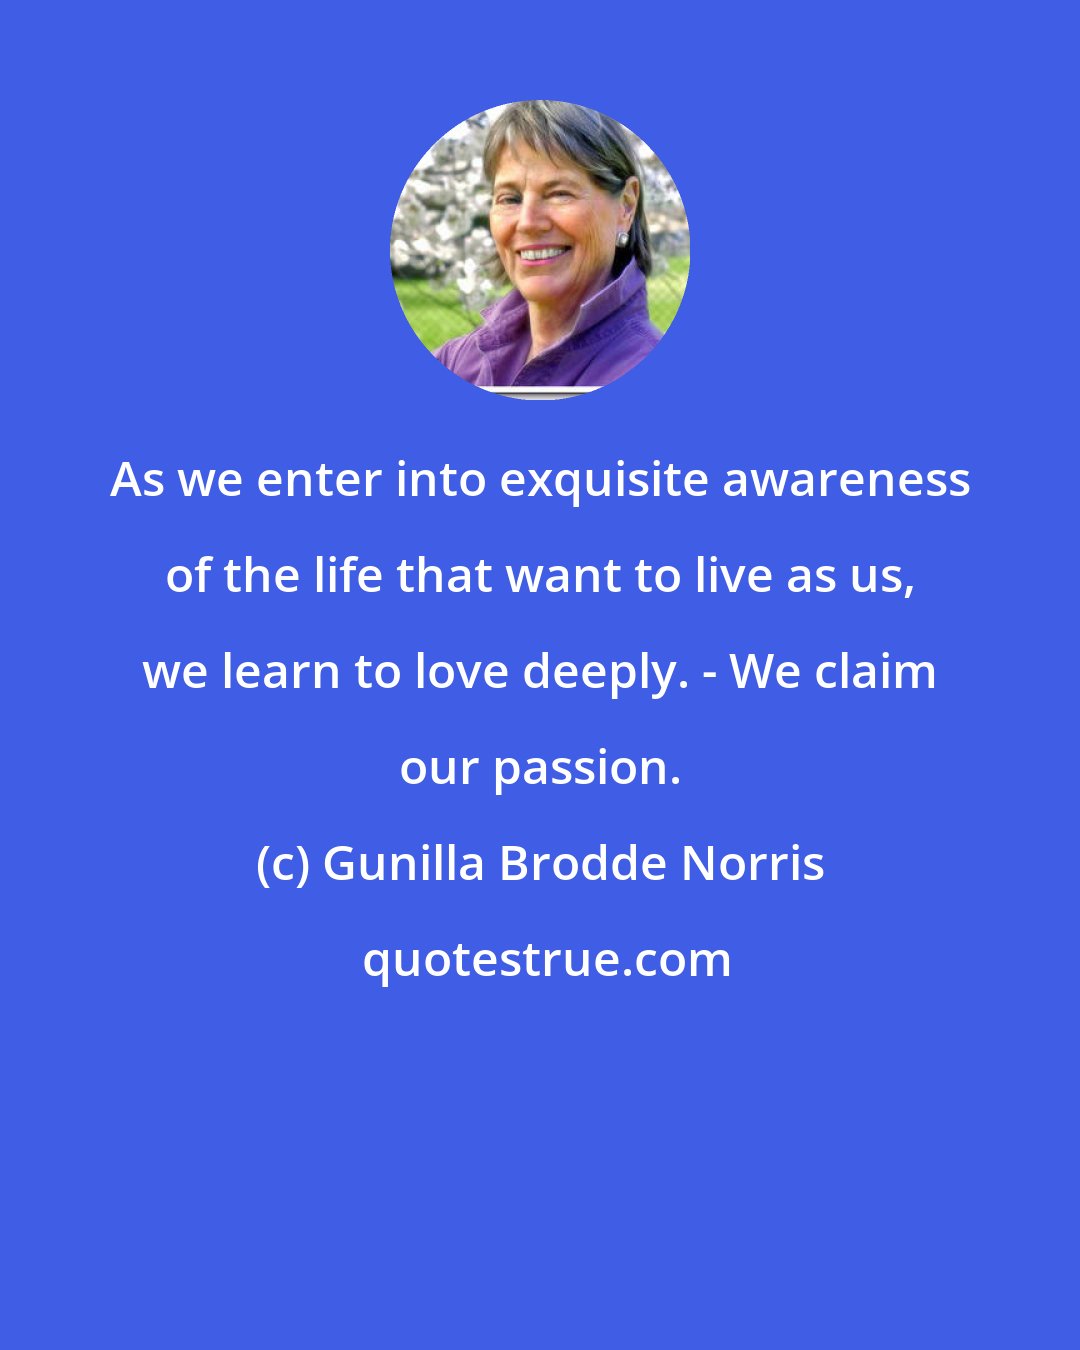 Gunilla Brodde Norris: As we enter into exquisite awareness of the life that want to live as us, we learn to love deeply. - We claim our passion.